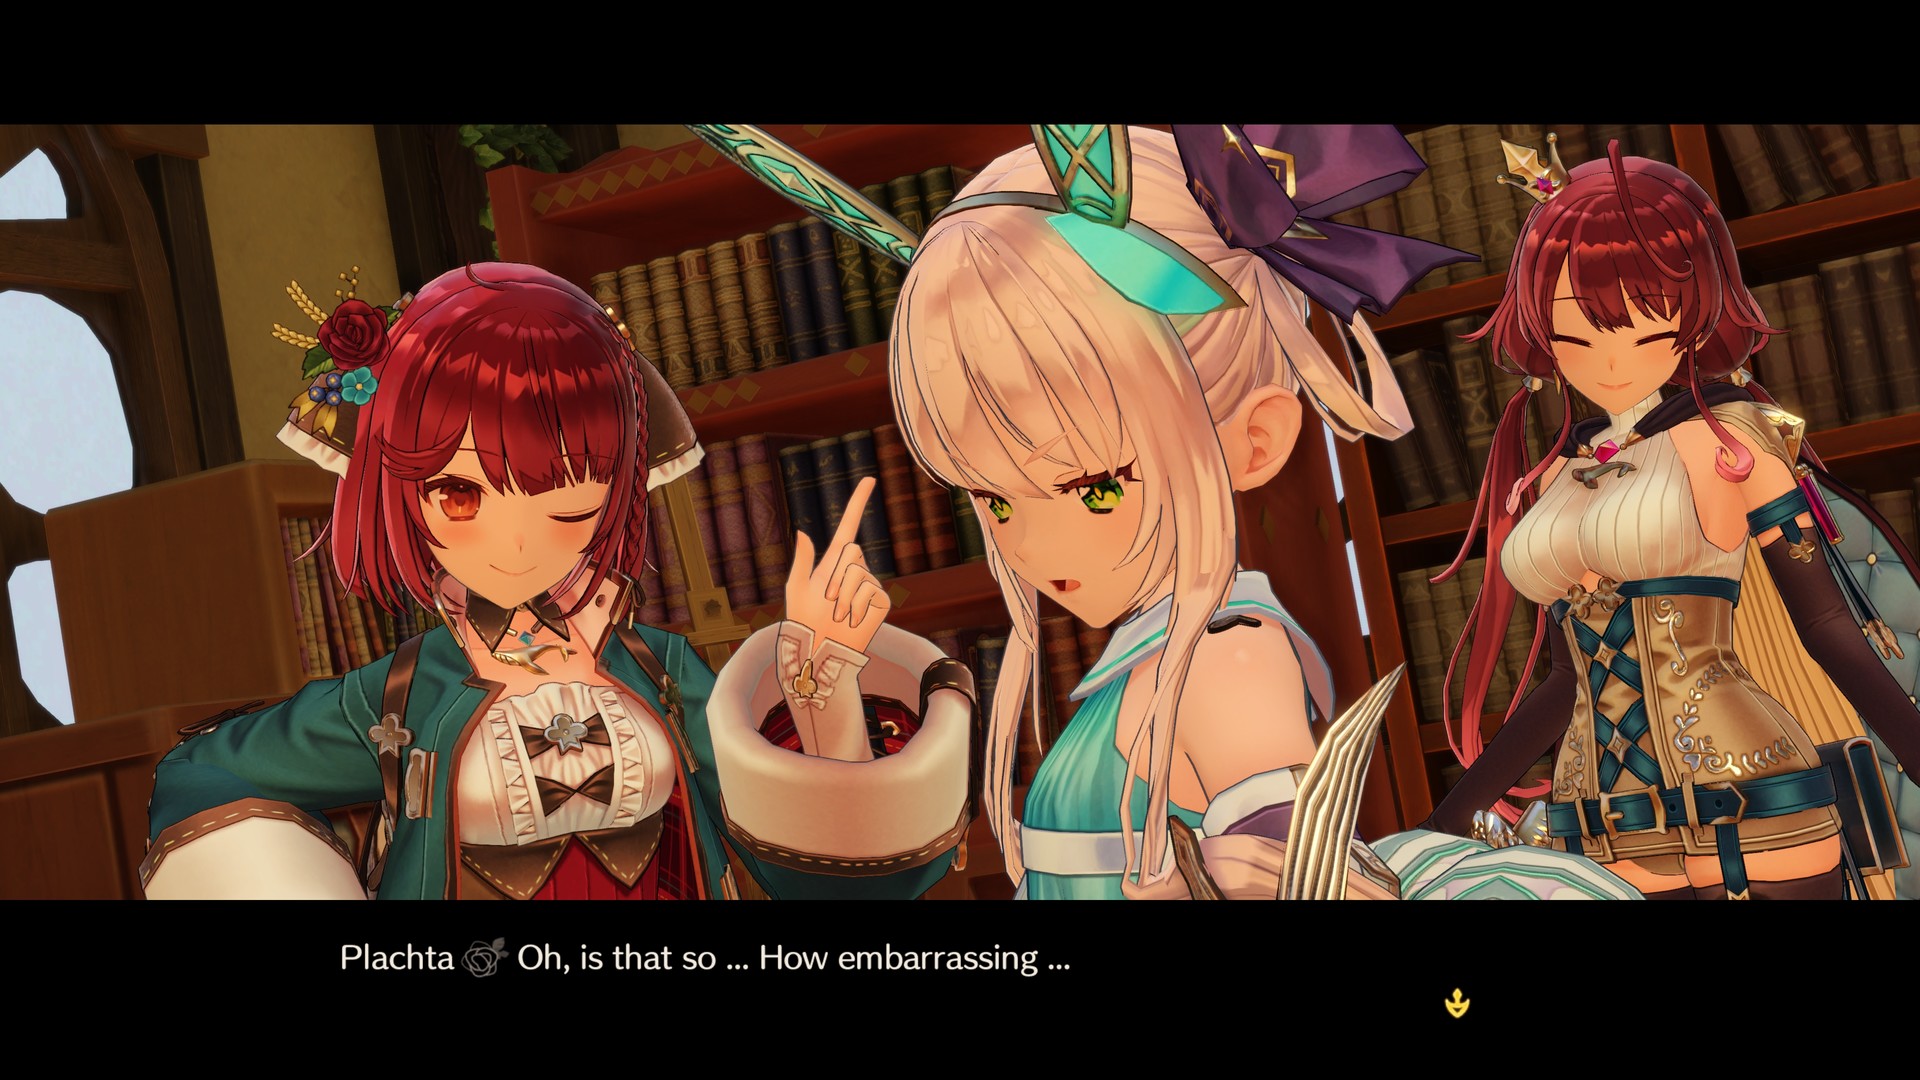 Atelier Sophie 2: The Alchemist of the Mysterious Dream Free Download